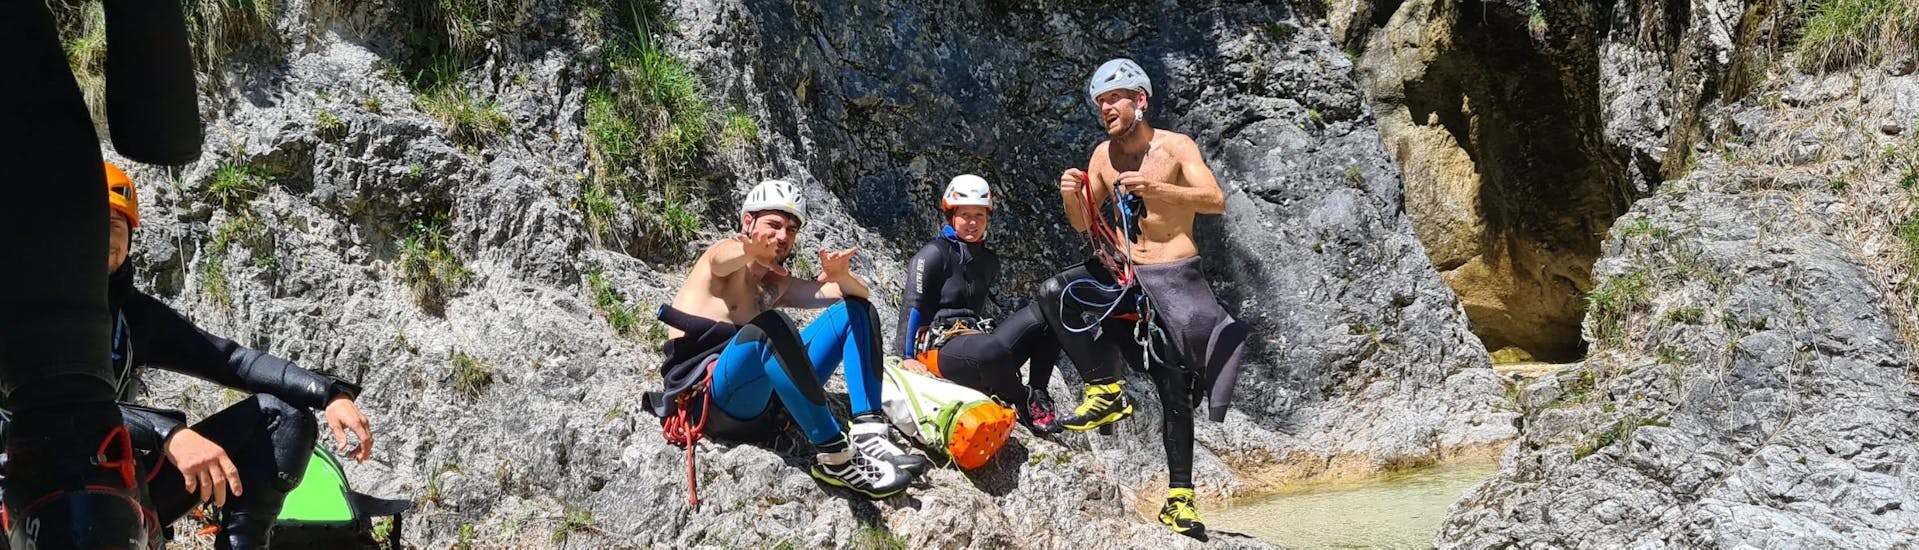 A group of participants during a break in canyoning near Salzburg - The Lone Ranger Tour with Mountain Guide Salzburg.